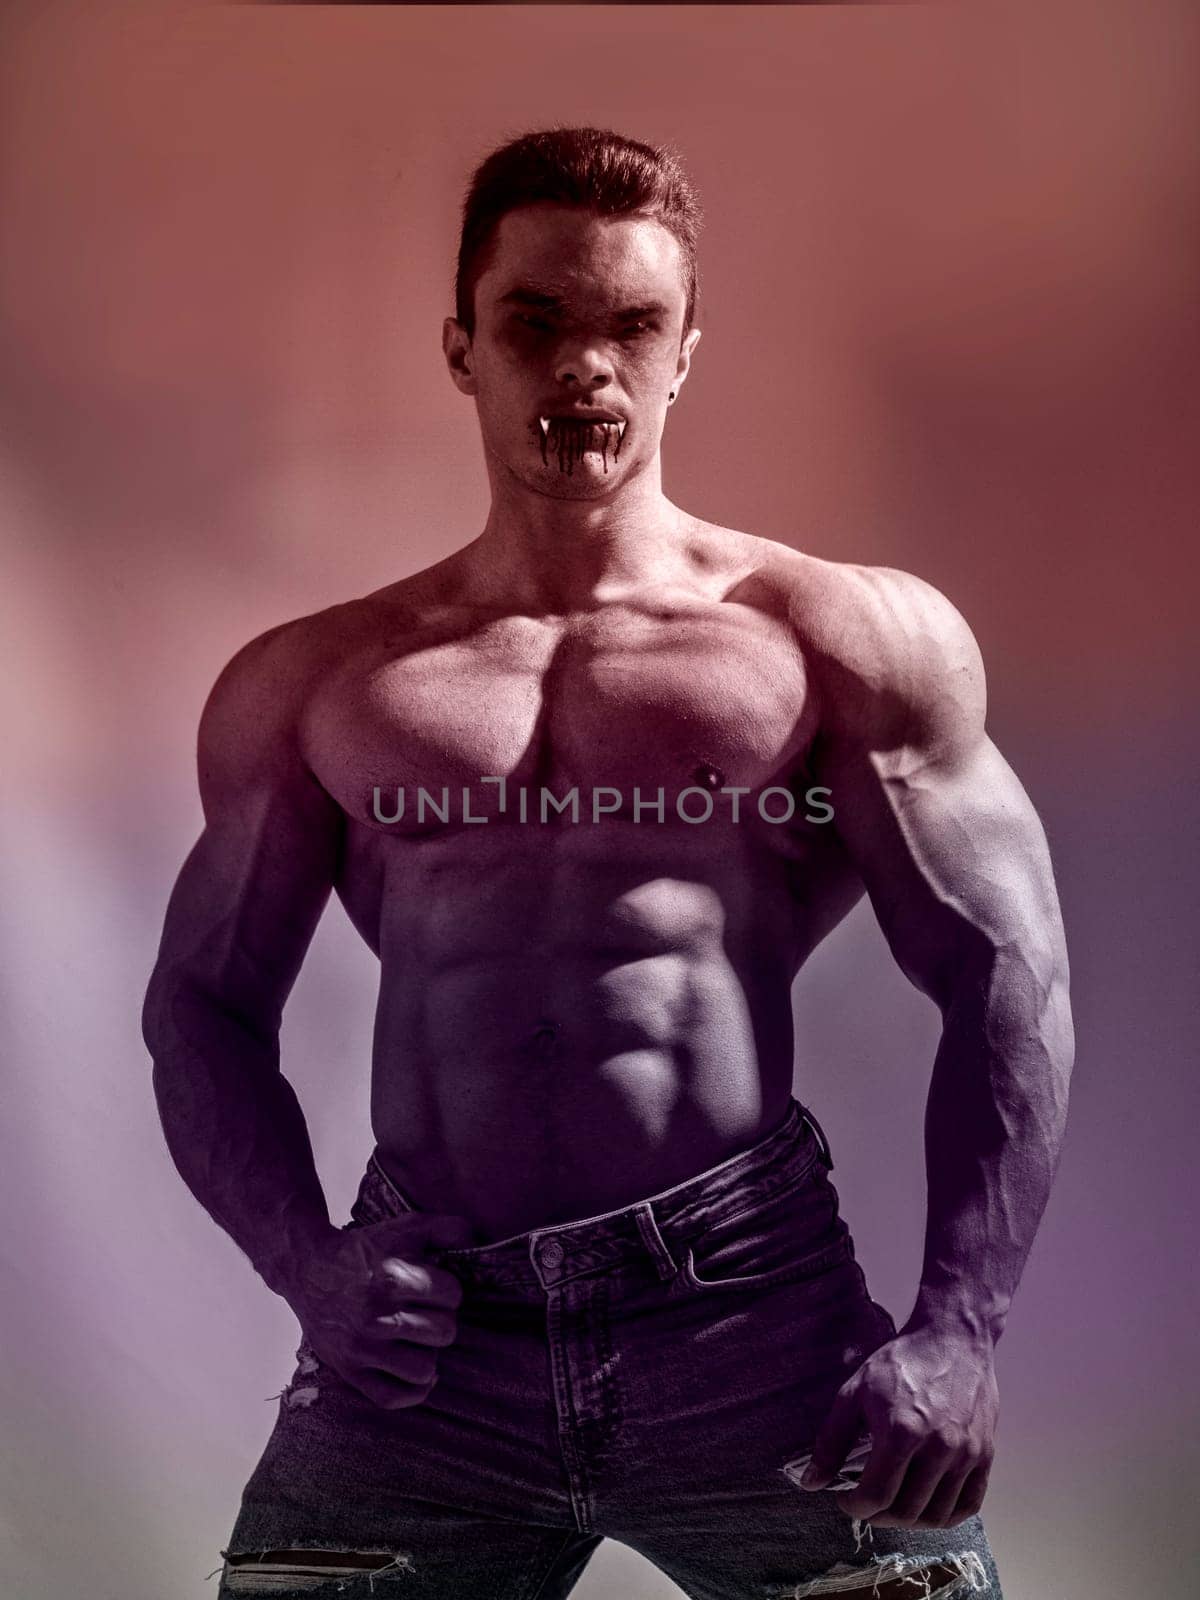 Portrait of a Young Muscular Vampire Man Shirtless, Showing his Torso, Chest and Abs, Looking at the Camera, on Dark Background for Halloween